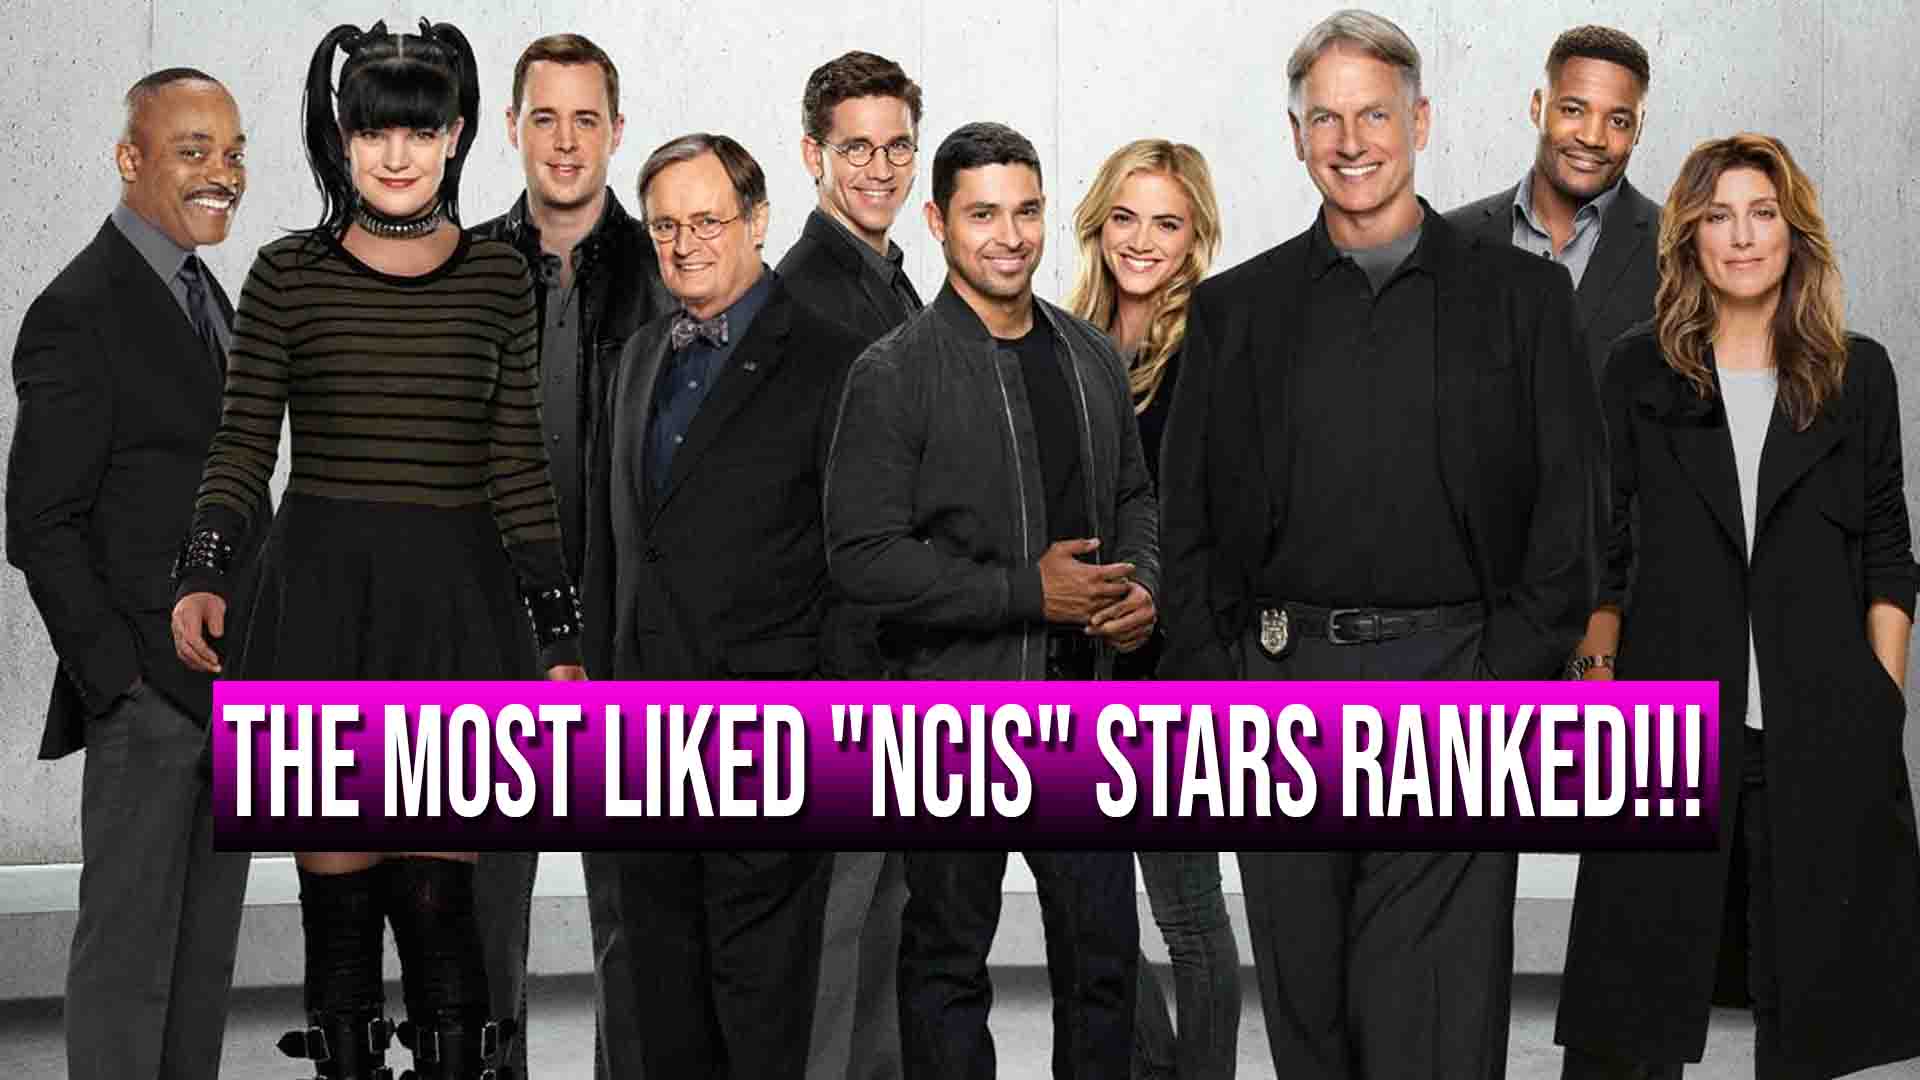 The Most Liked “NCIS” Stars Ranked From Lowest To Highest